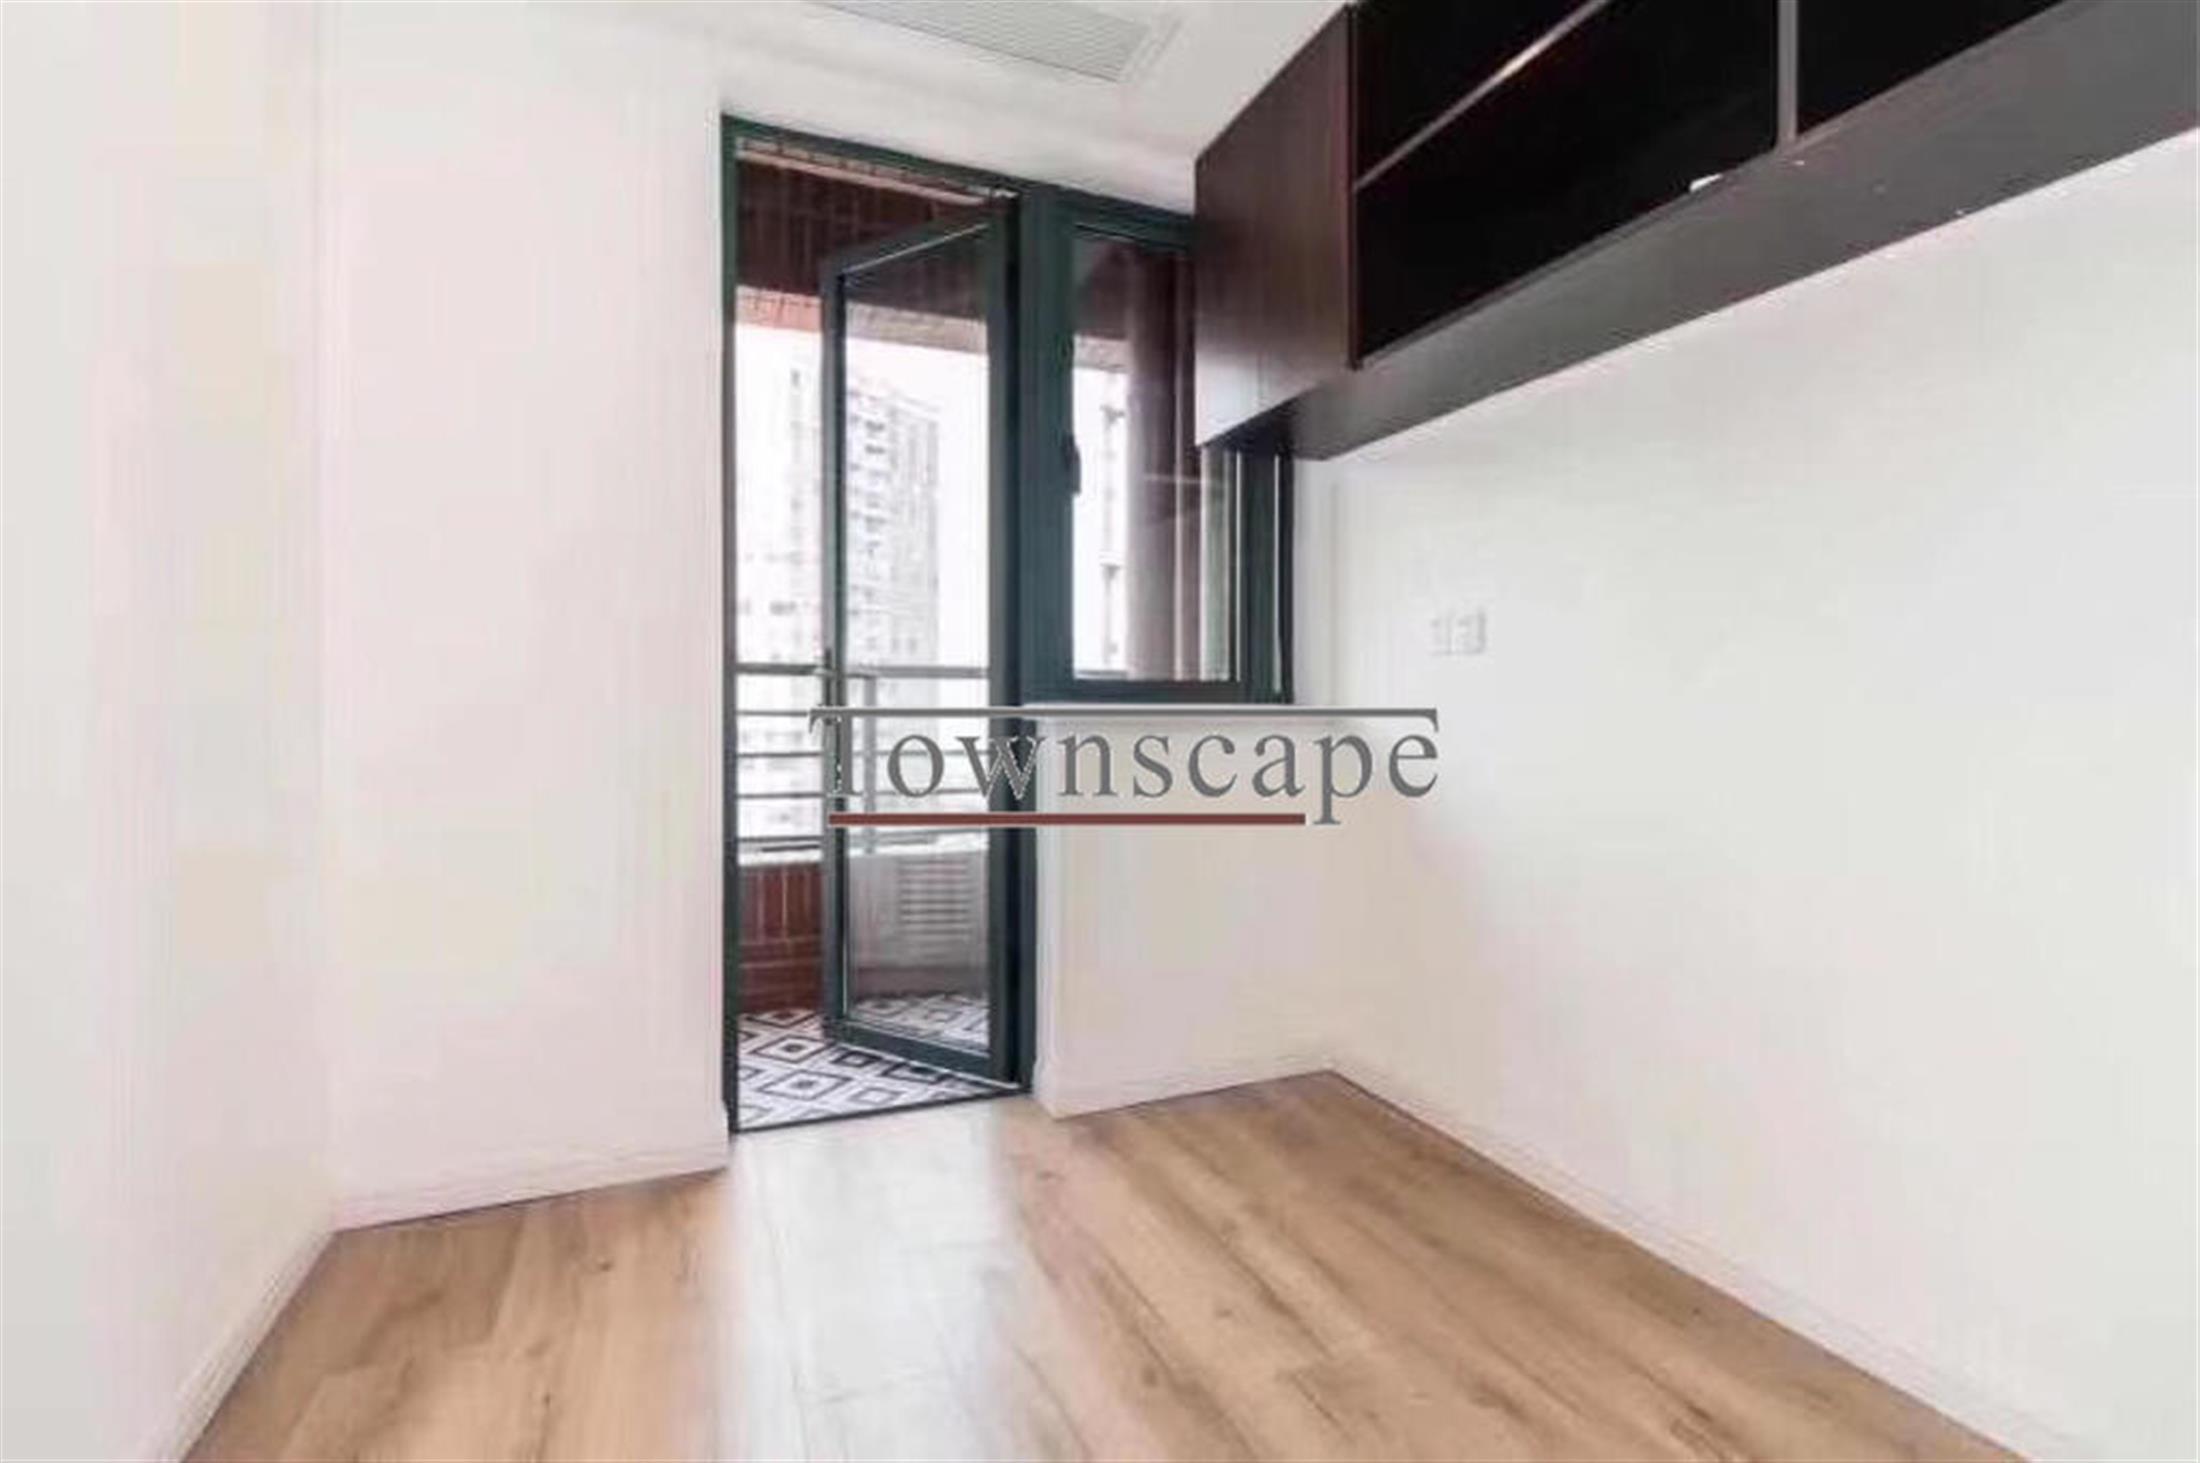 Office/Bedroom Spacious Renovated FFC Courtyards Apartment w Great Views for Rent in Shanghai